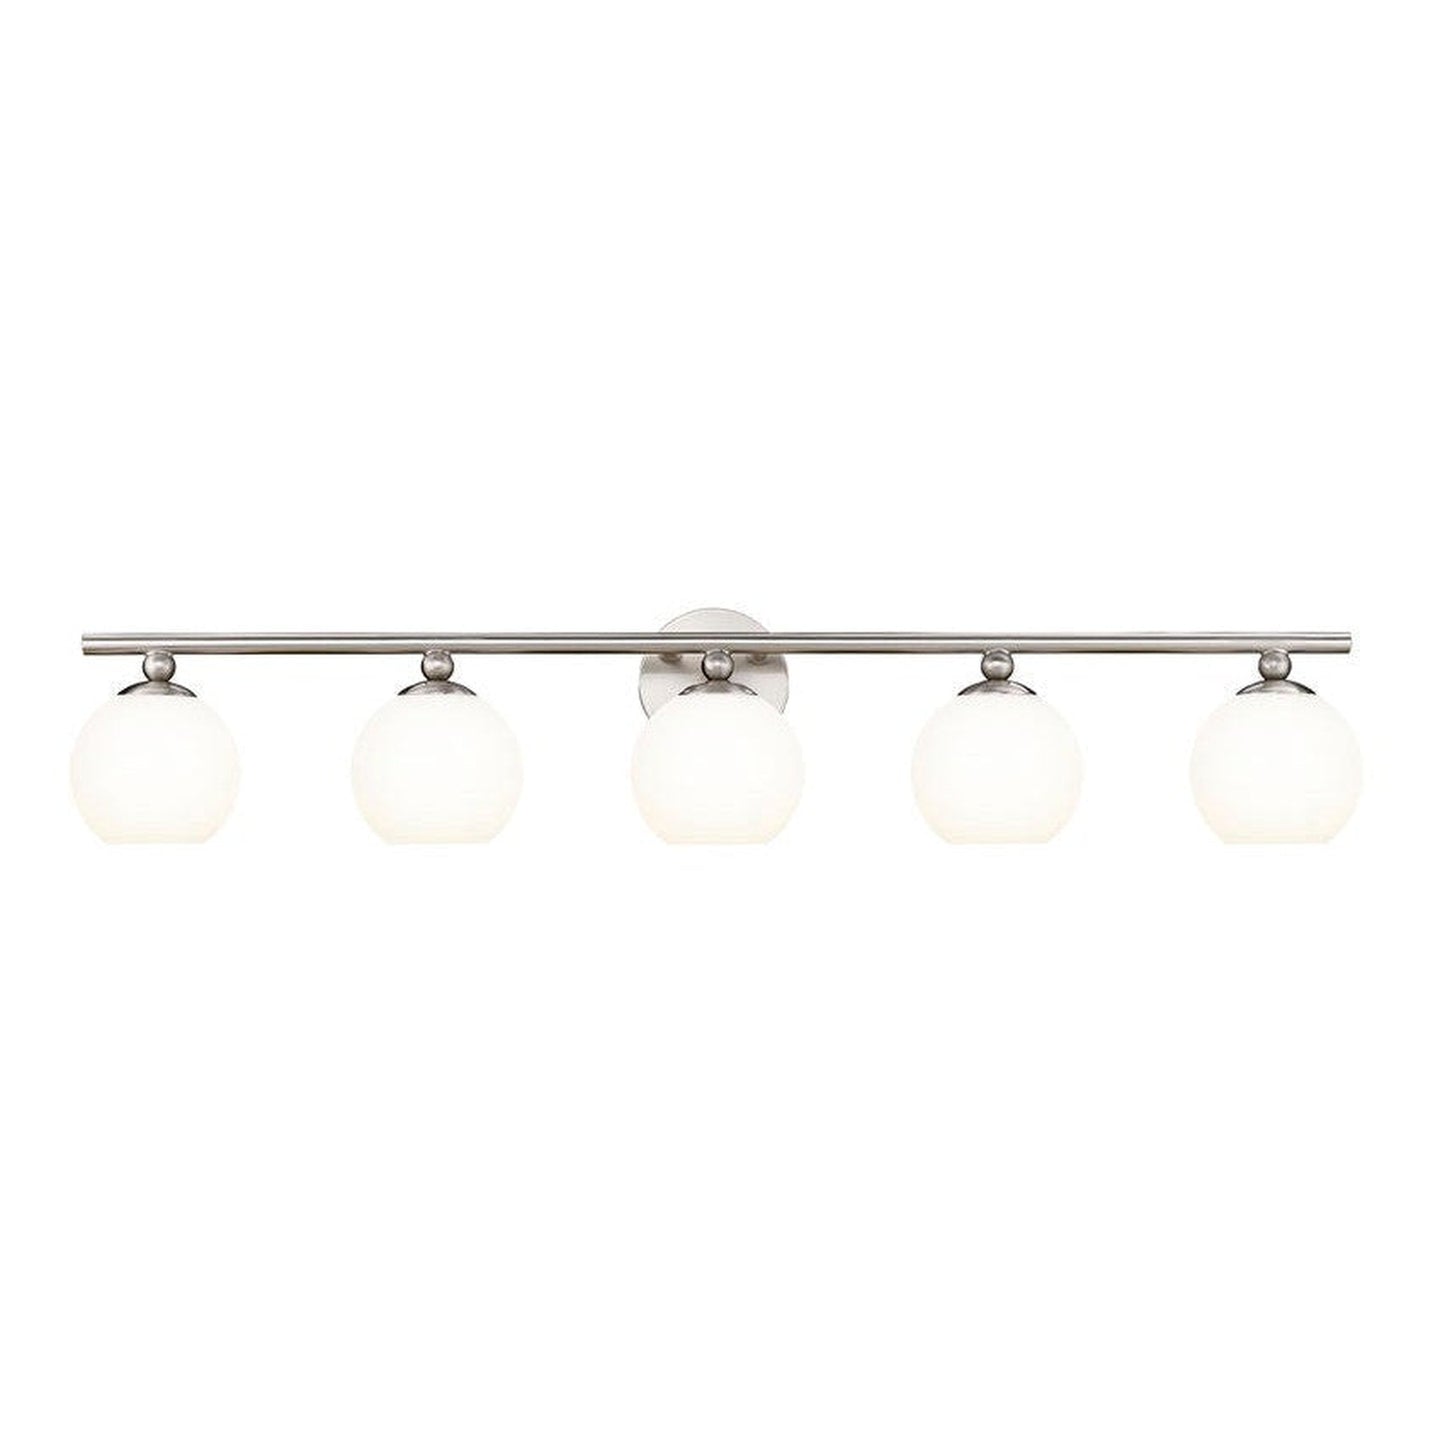 Z-Lite Neoma 38" 5-Light Brushed Nickel and Opal Etched Glass Shade Vanity Light